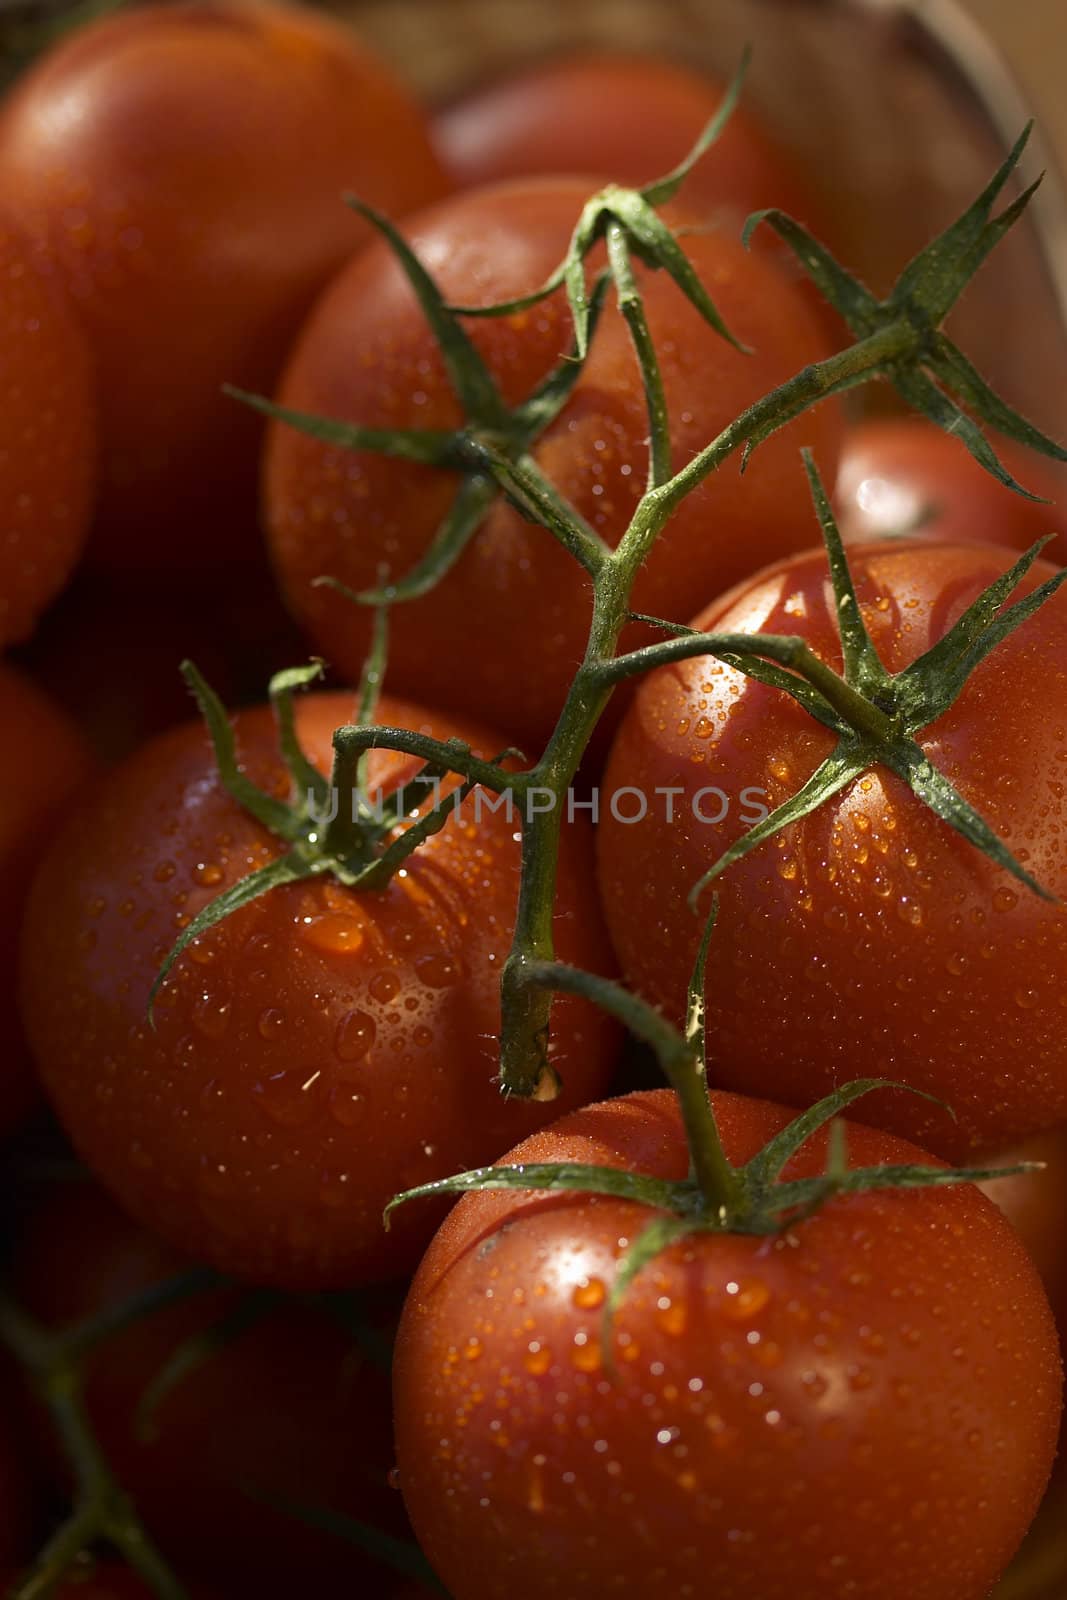 tomato and waterdrops
